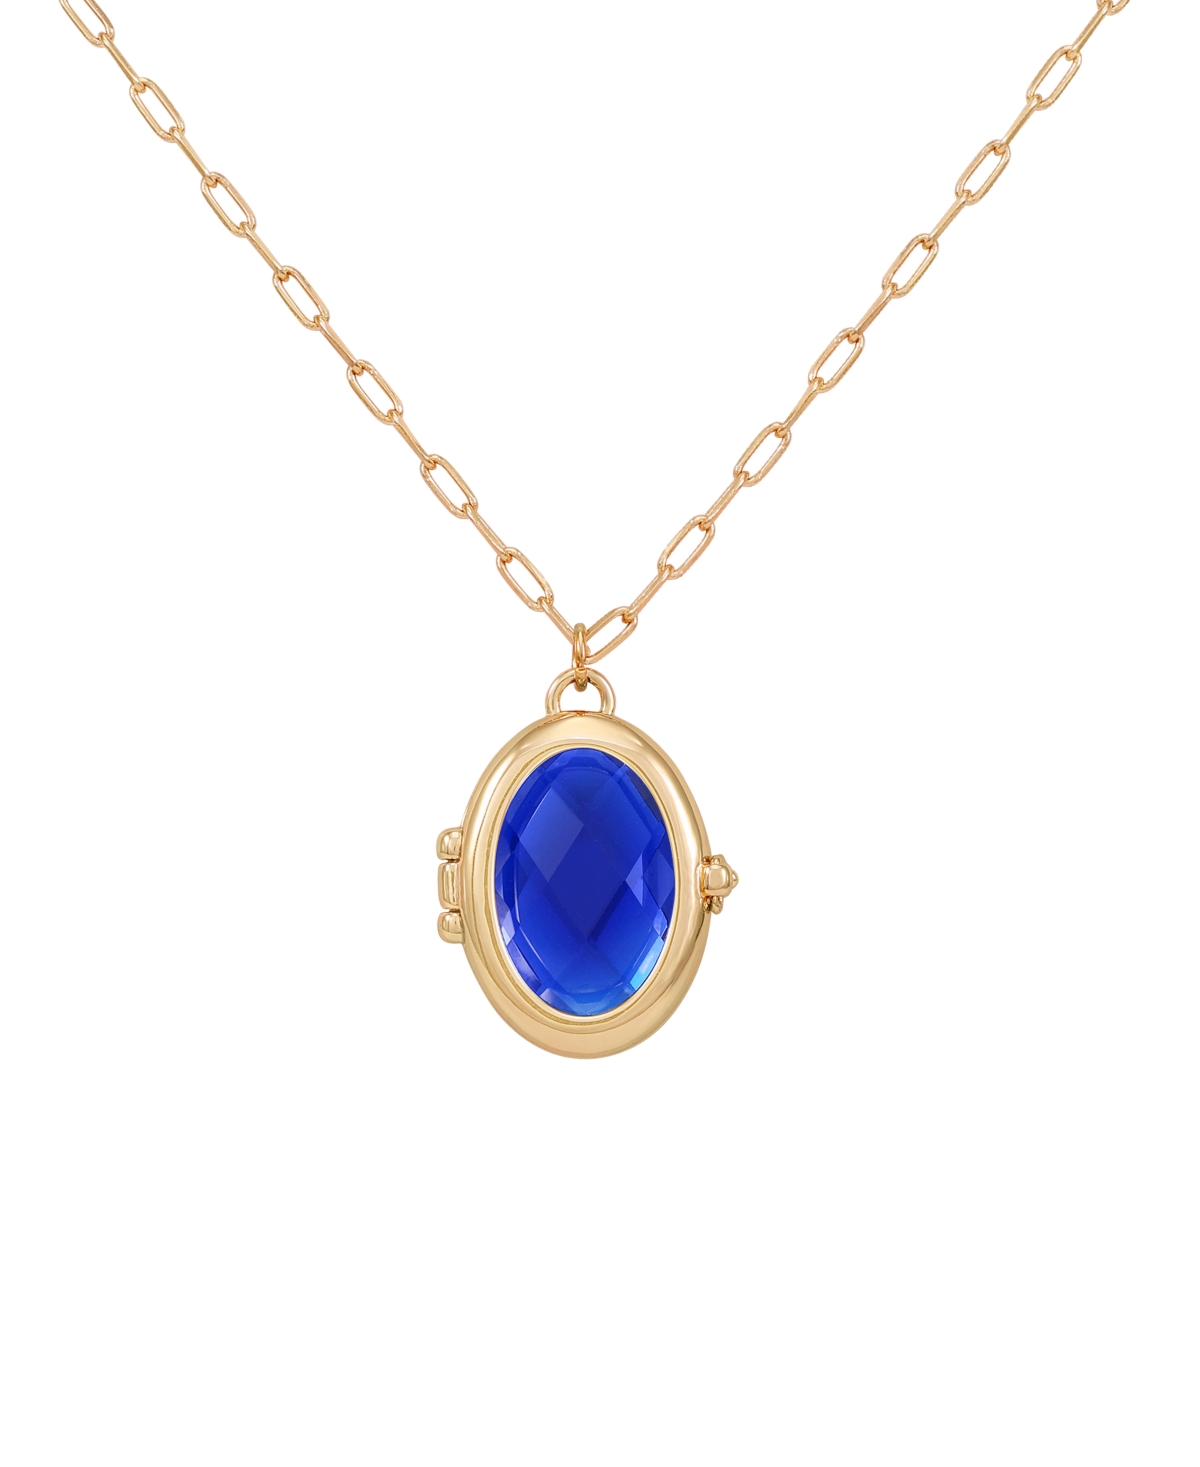 Guess Gold-tone Removable Stone Oval Locket Pendant Necklace, 18" + 3" Extender In Sapphire